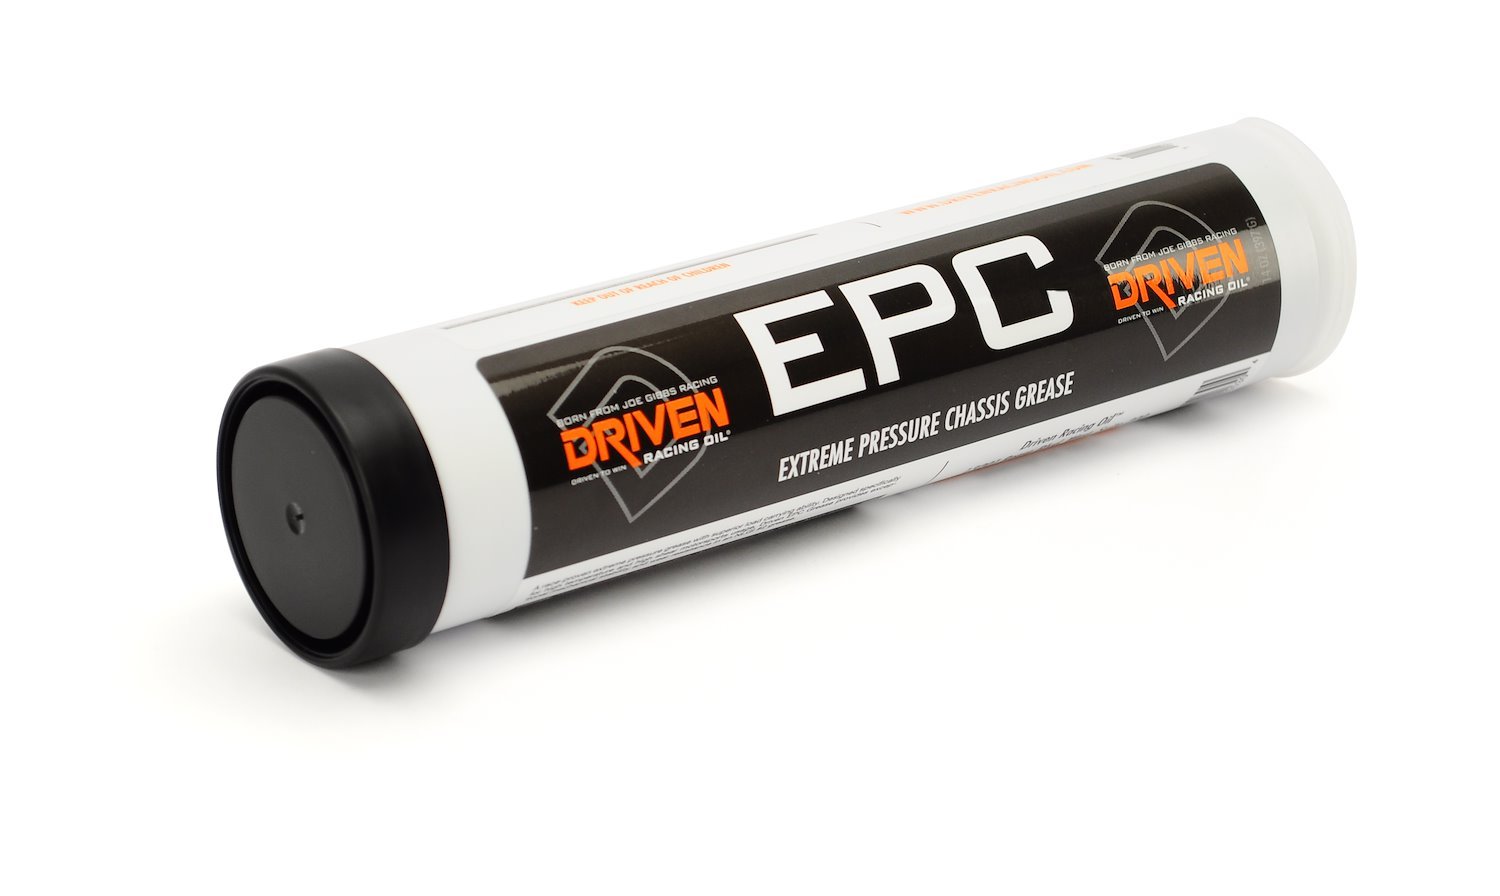 Extreme Pressure Chassis Grease 14 oz. (400 mg)